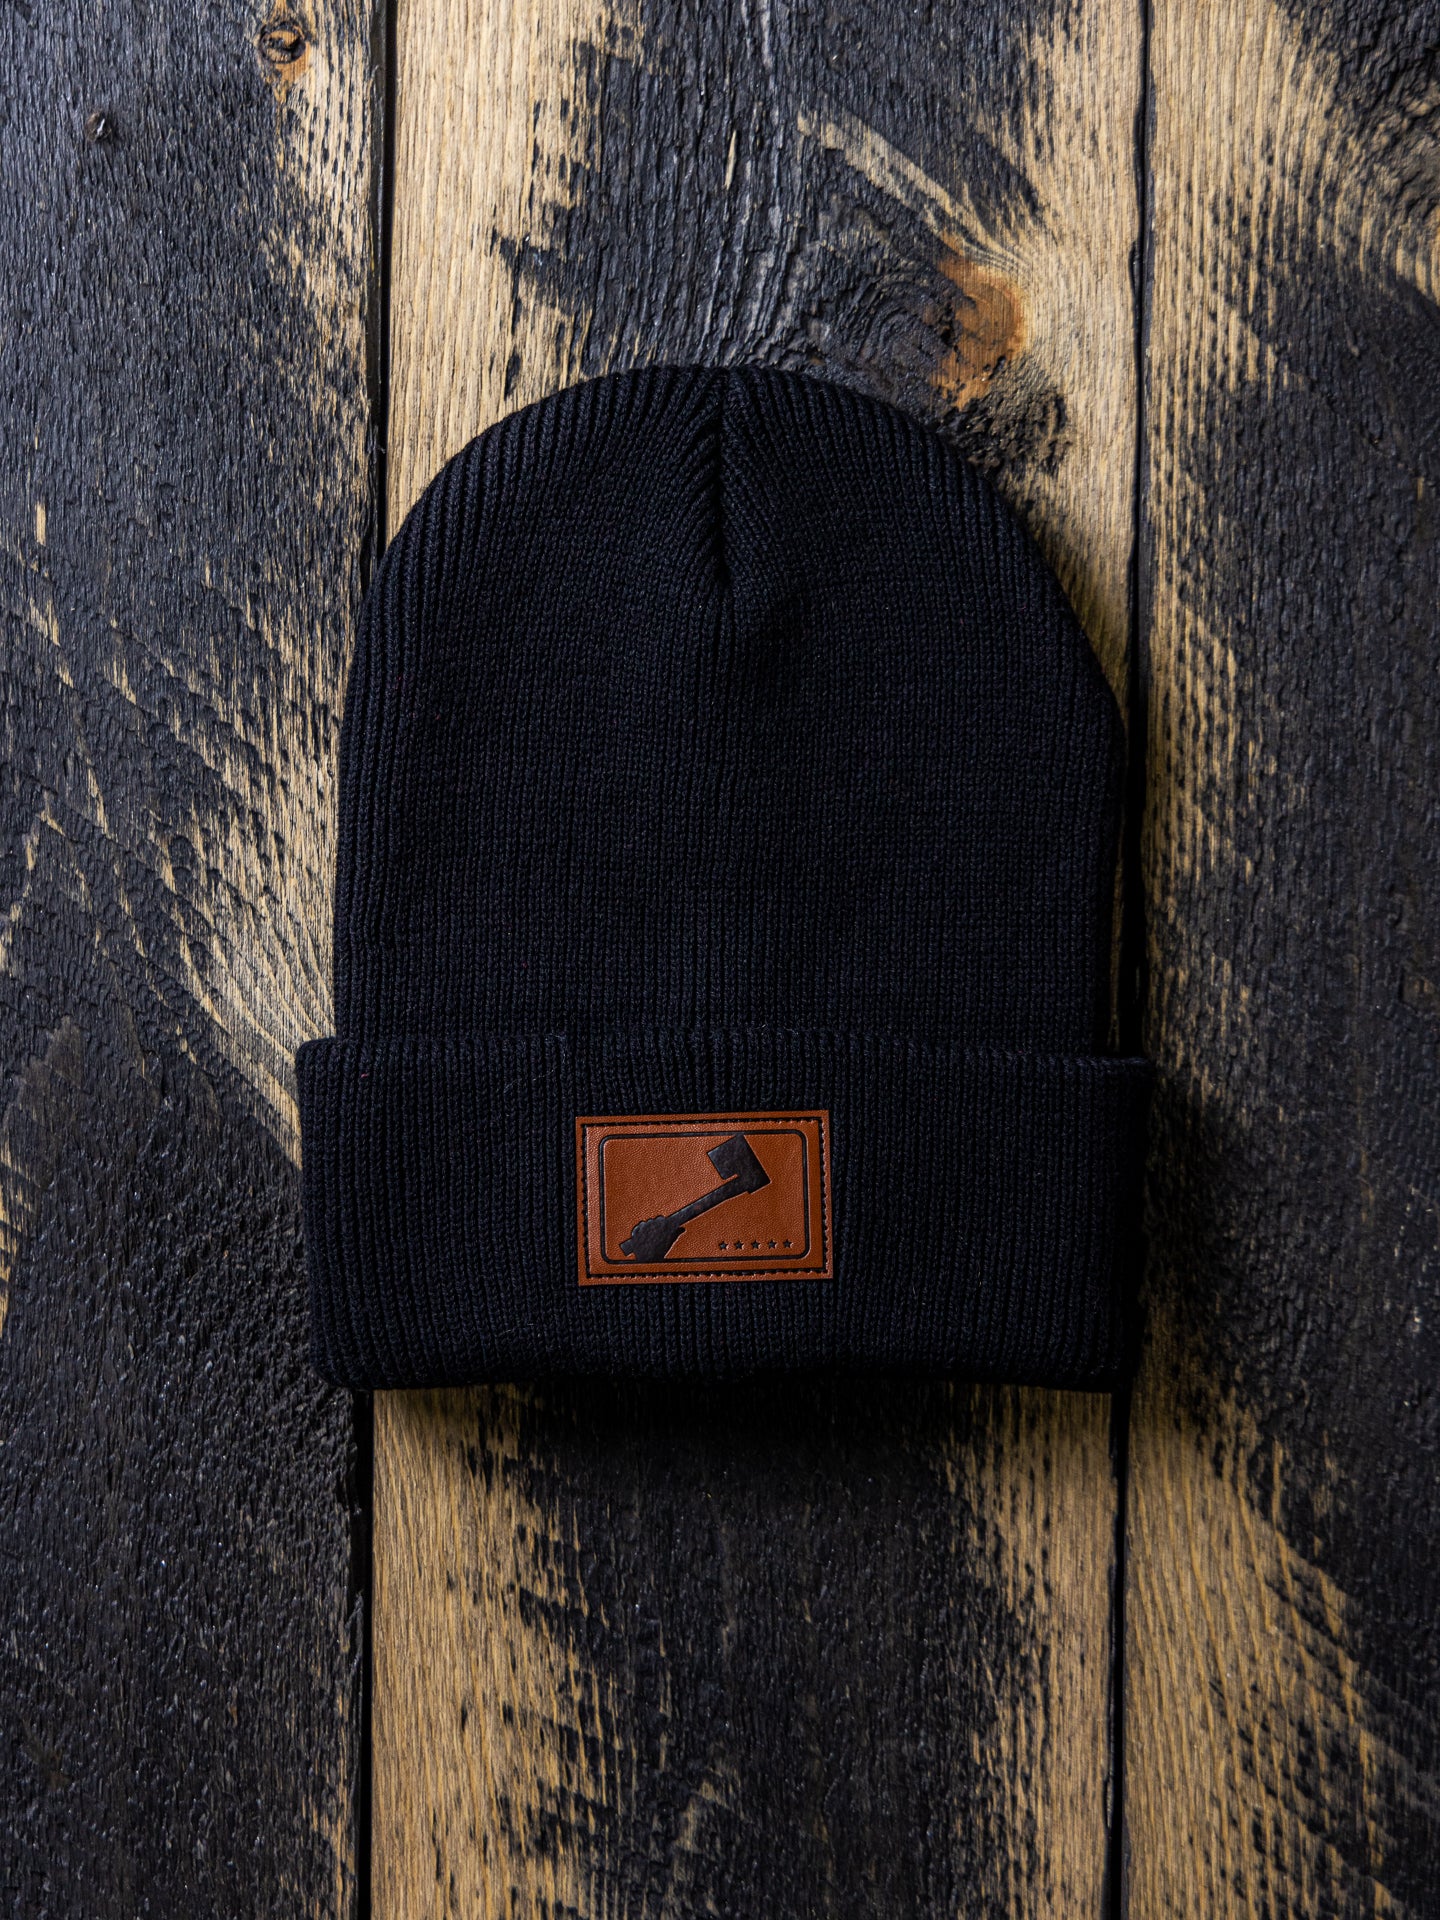 Black Toque Hate with leather axe patch